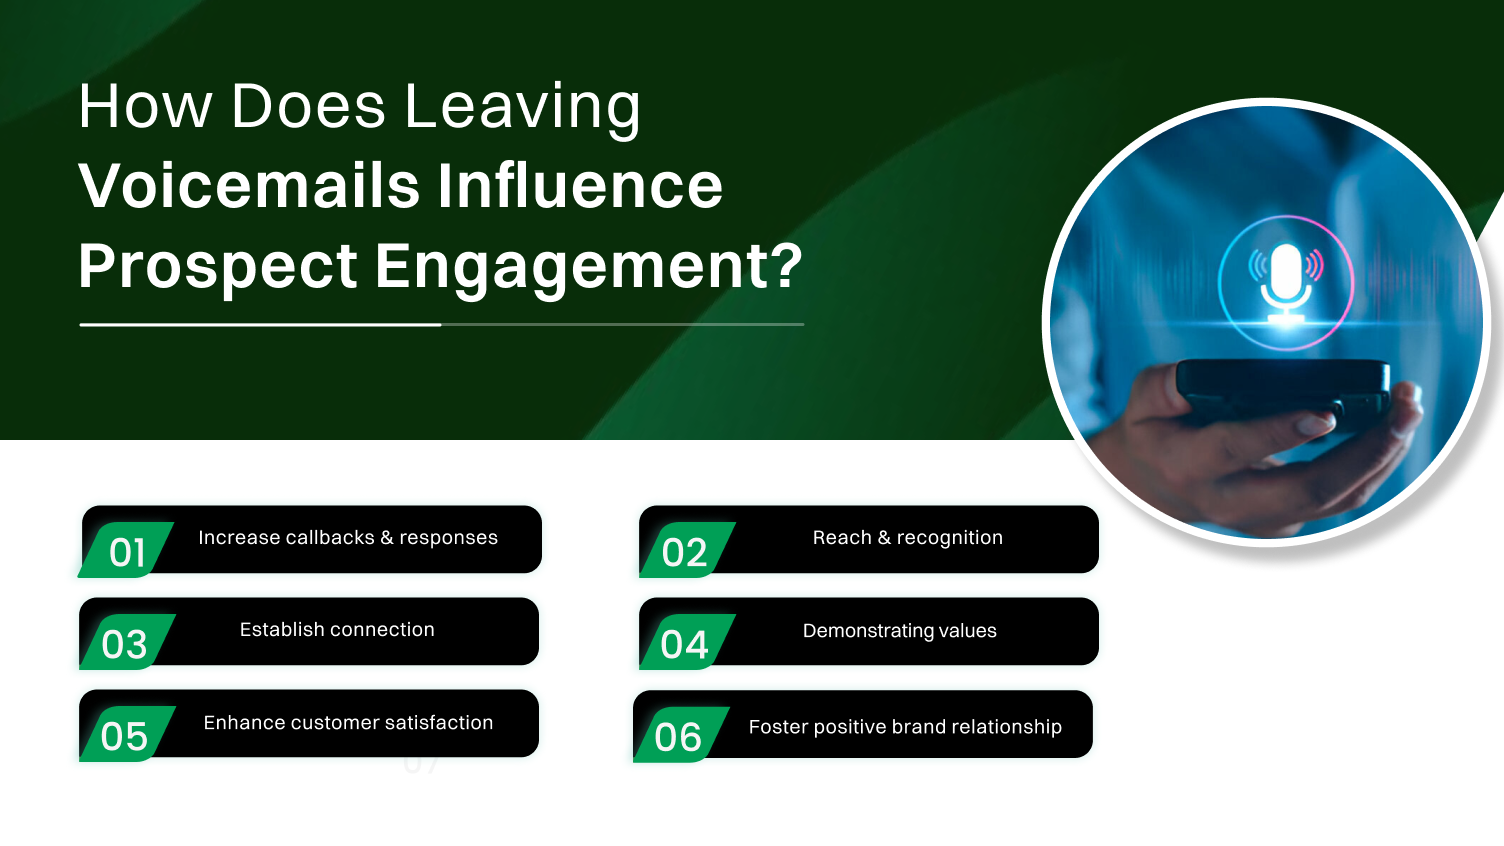 How does leaving voicemails influence prospect engagement? 